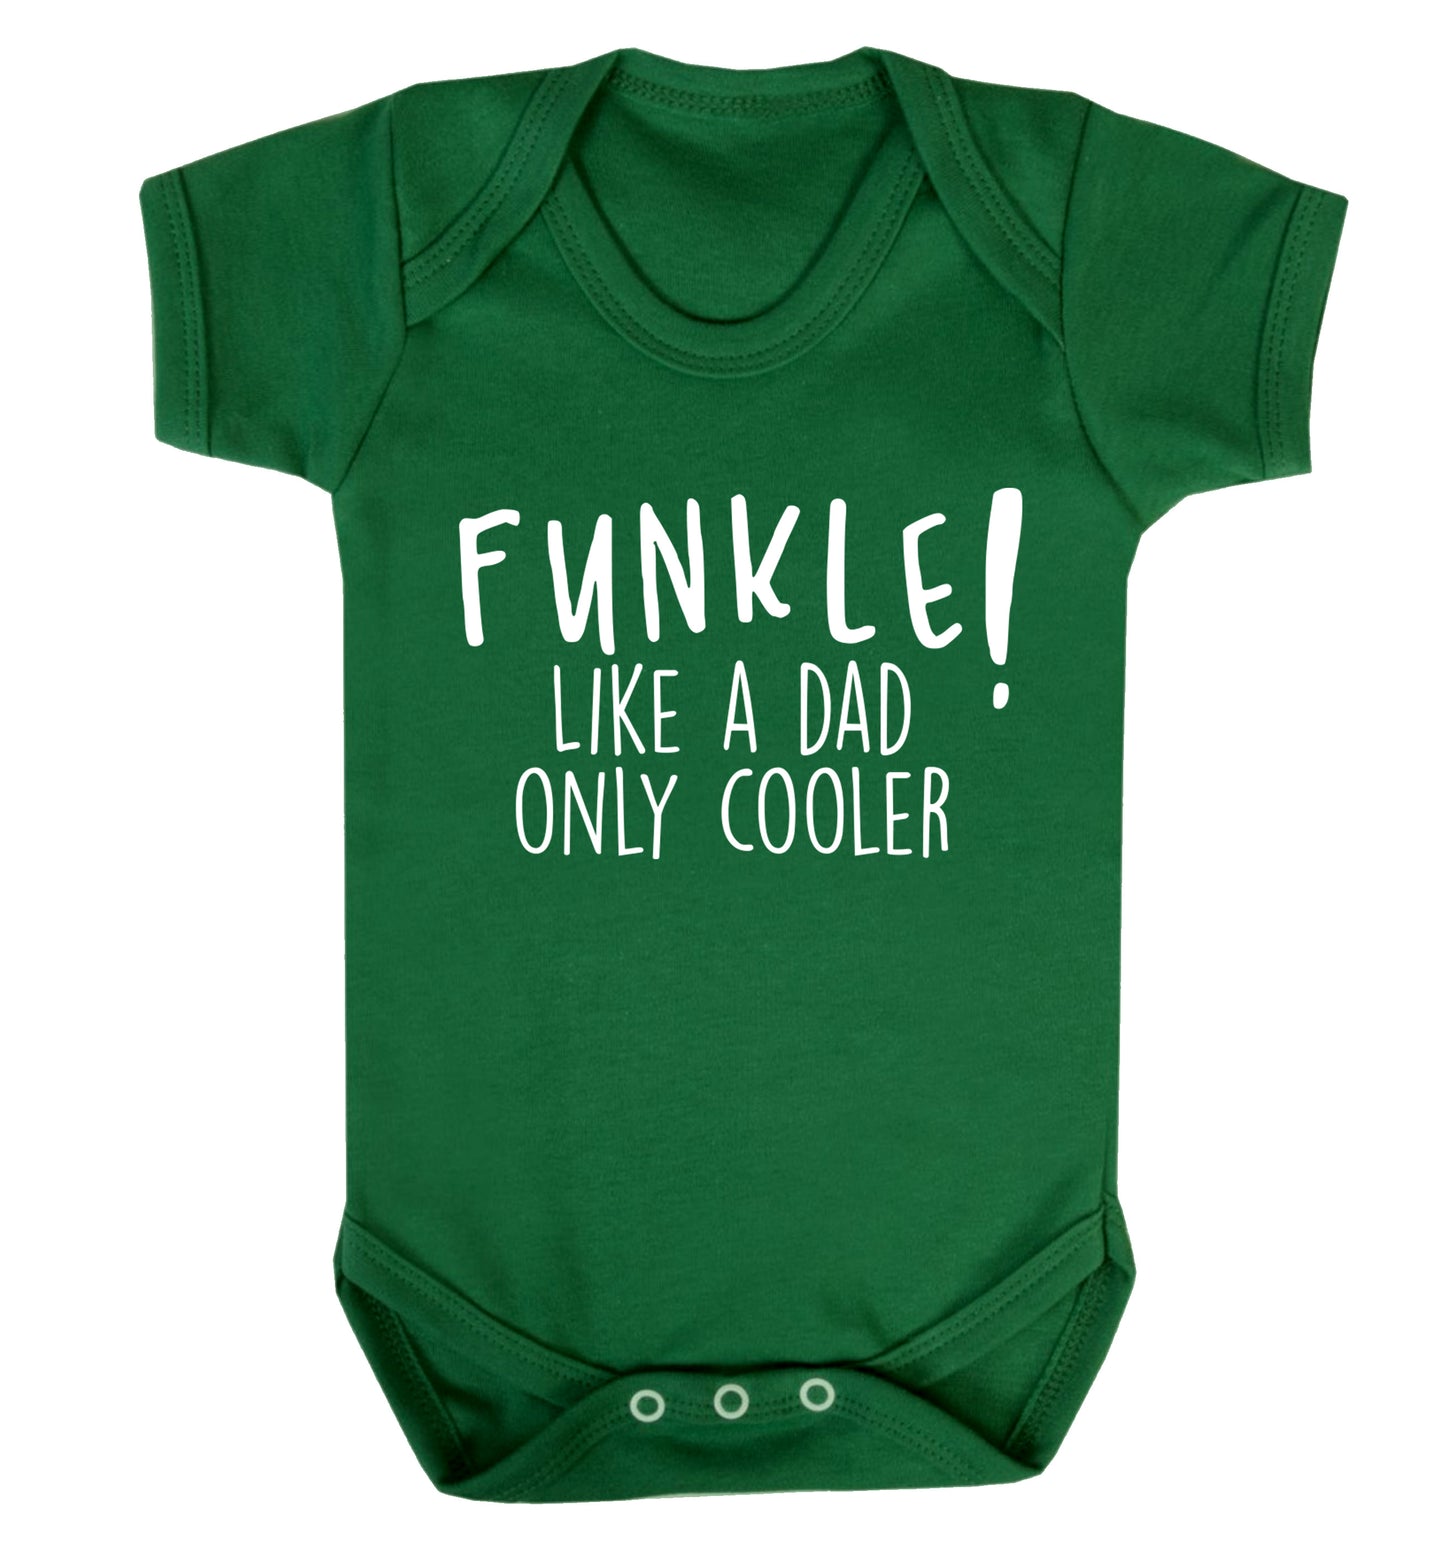 Funkle Like a Dad Only Cooler Baby Vest green 18-24 months